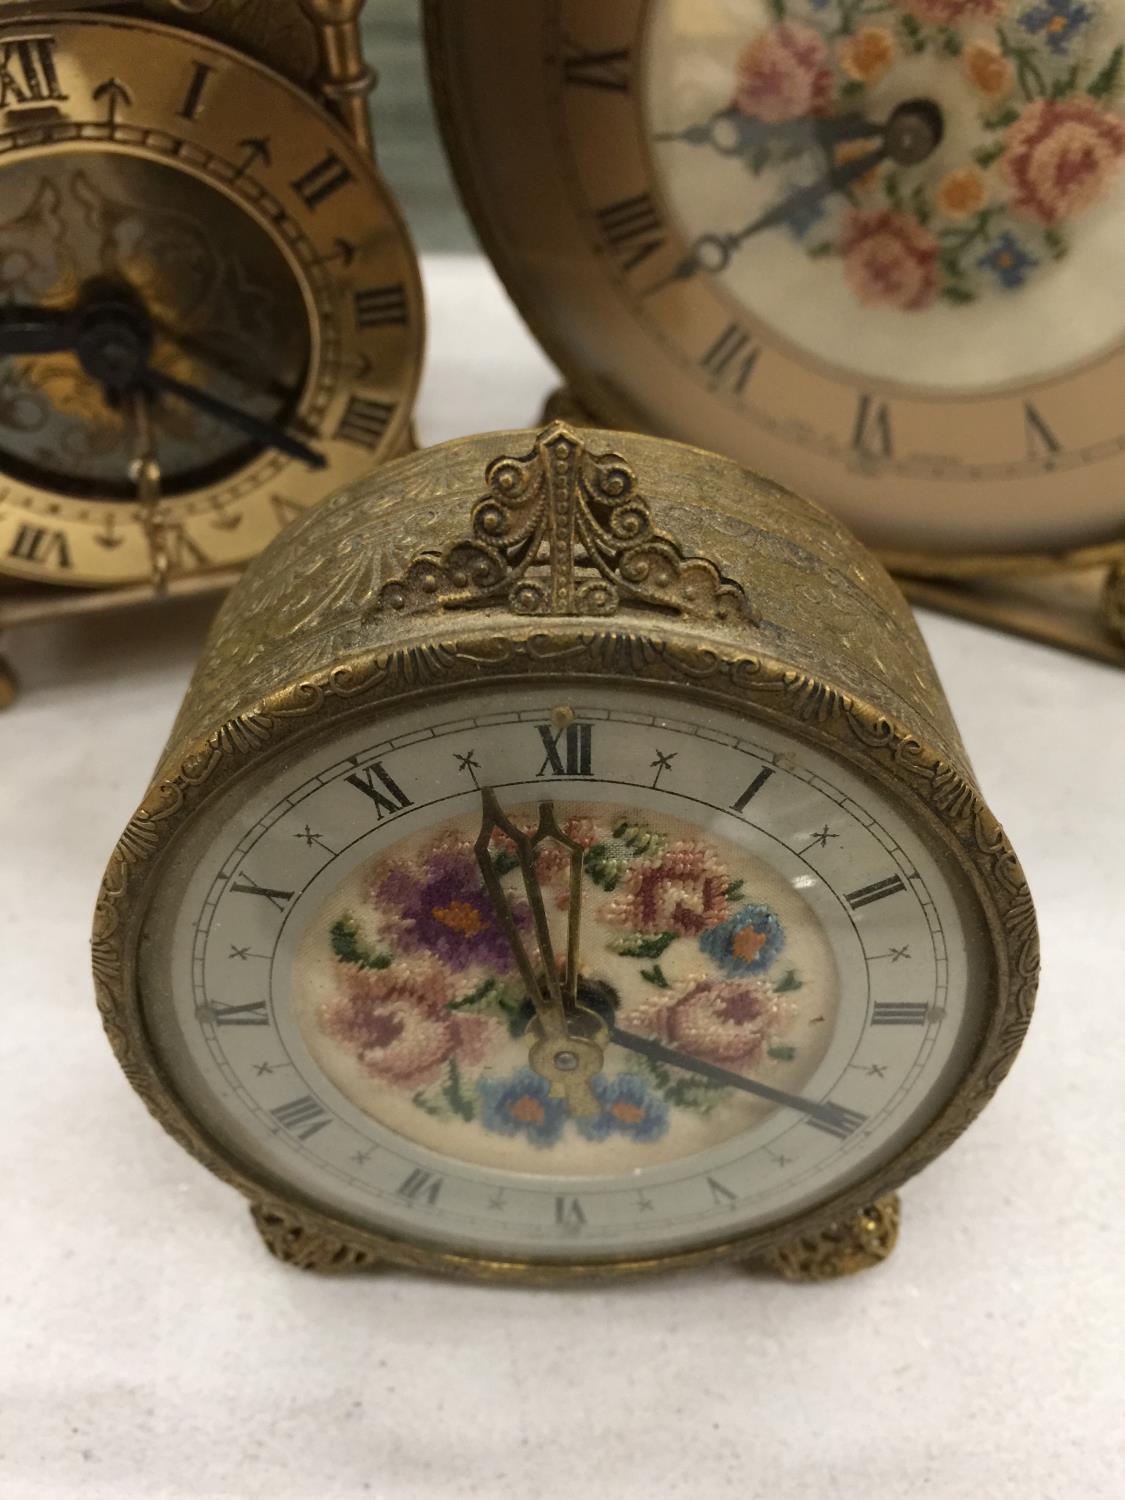 THREE VINTAGE CLOCKS TO INCLUDE A BRASS LANTERN CLOCK, A PETIT POINT MANTLE CLOCK AND ALARM CLOCK - Image 2 of 5